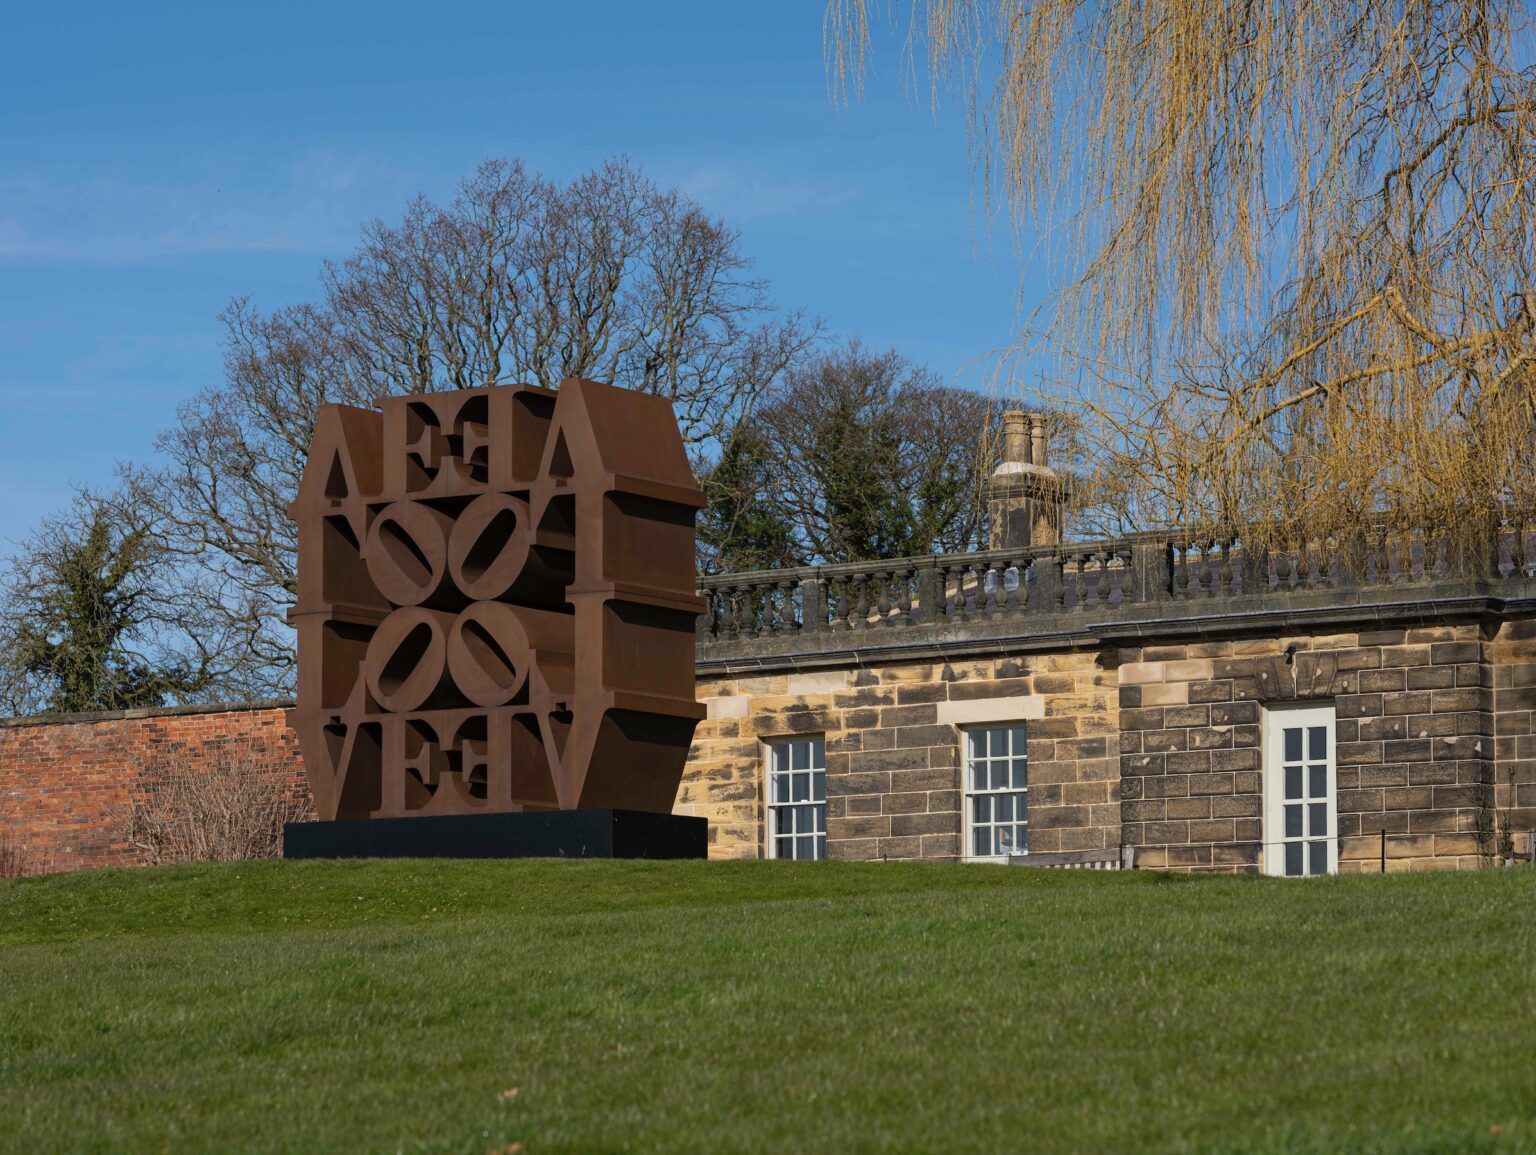 A corten steel sculpture made up of the letters 'LOVE' repeated and stacked in a square format. The sculpture is set on a grassy mound with a stone building behind.